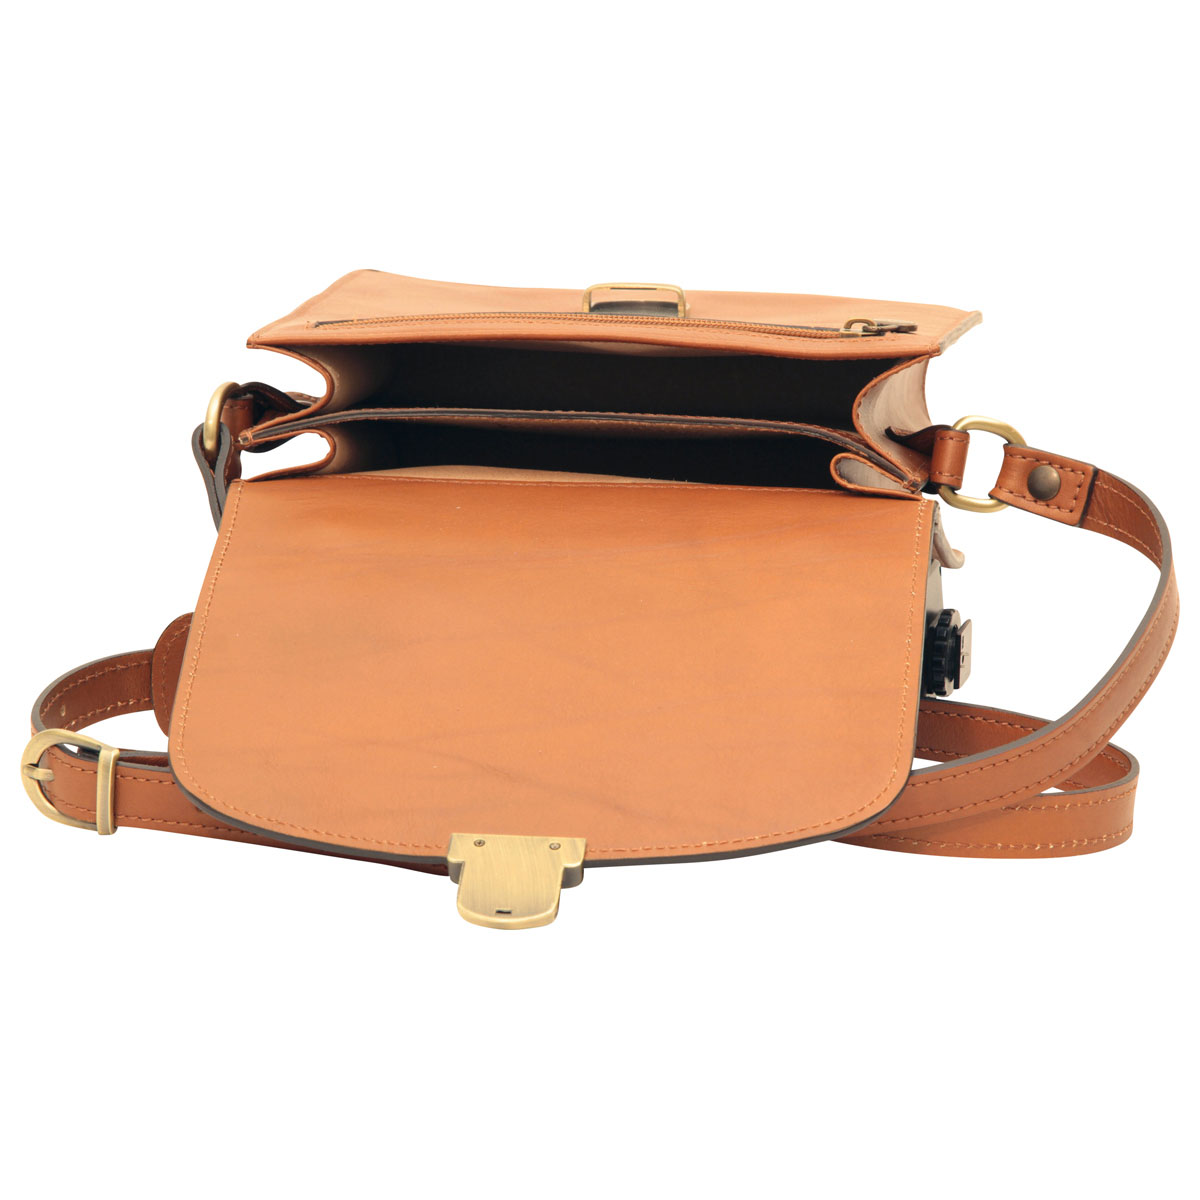 Classica II Leather Satchel - Brown Colonial | 079689CO UK | Old Angler Firenze